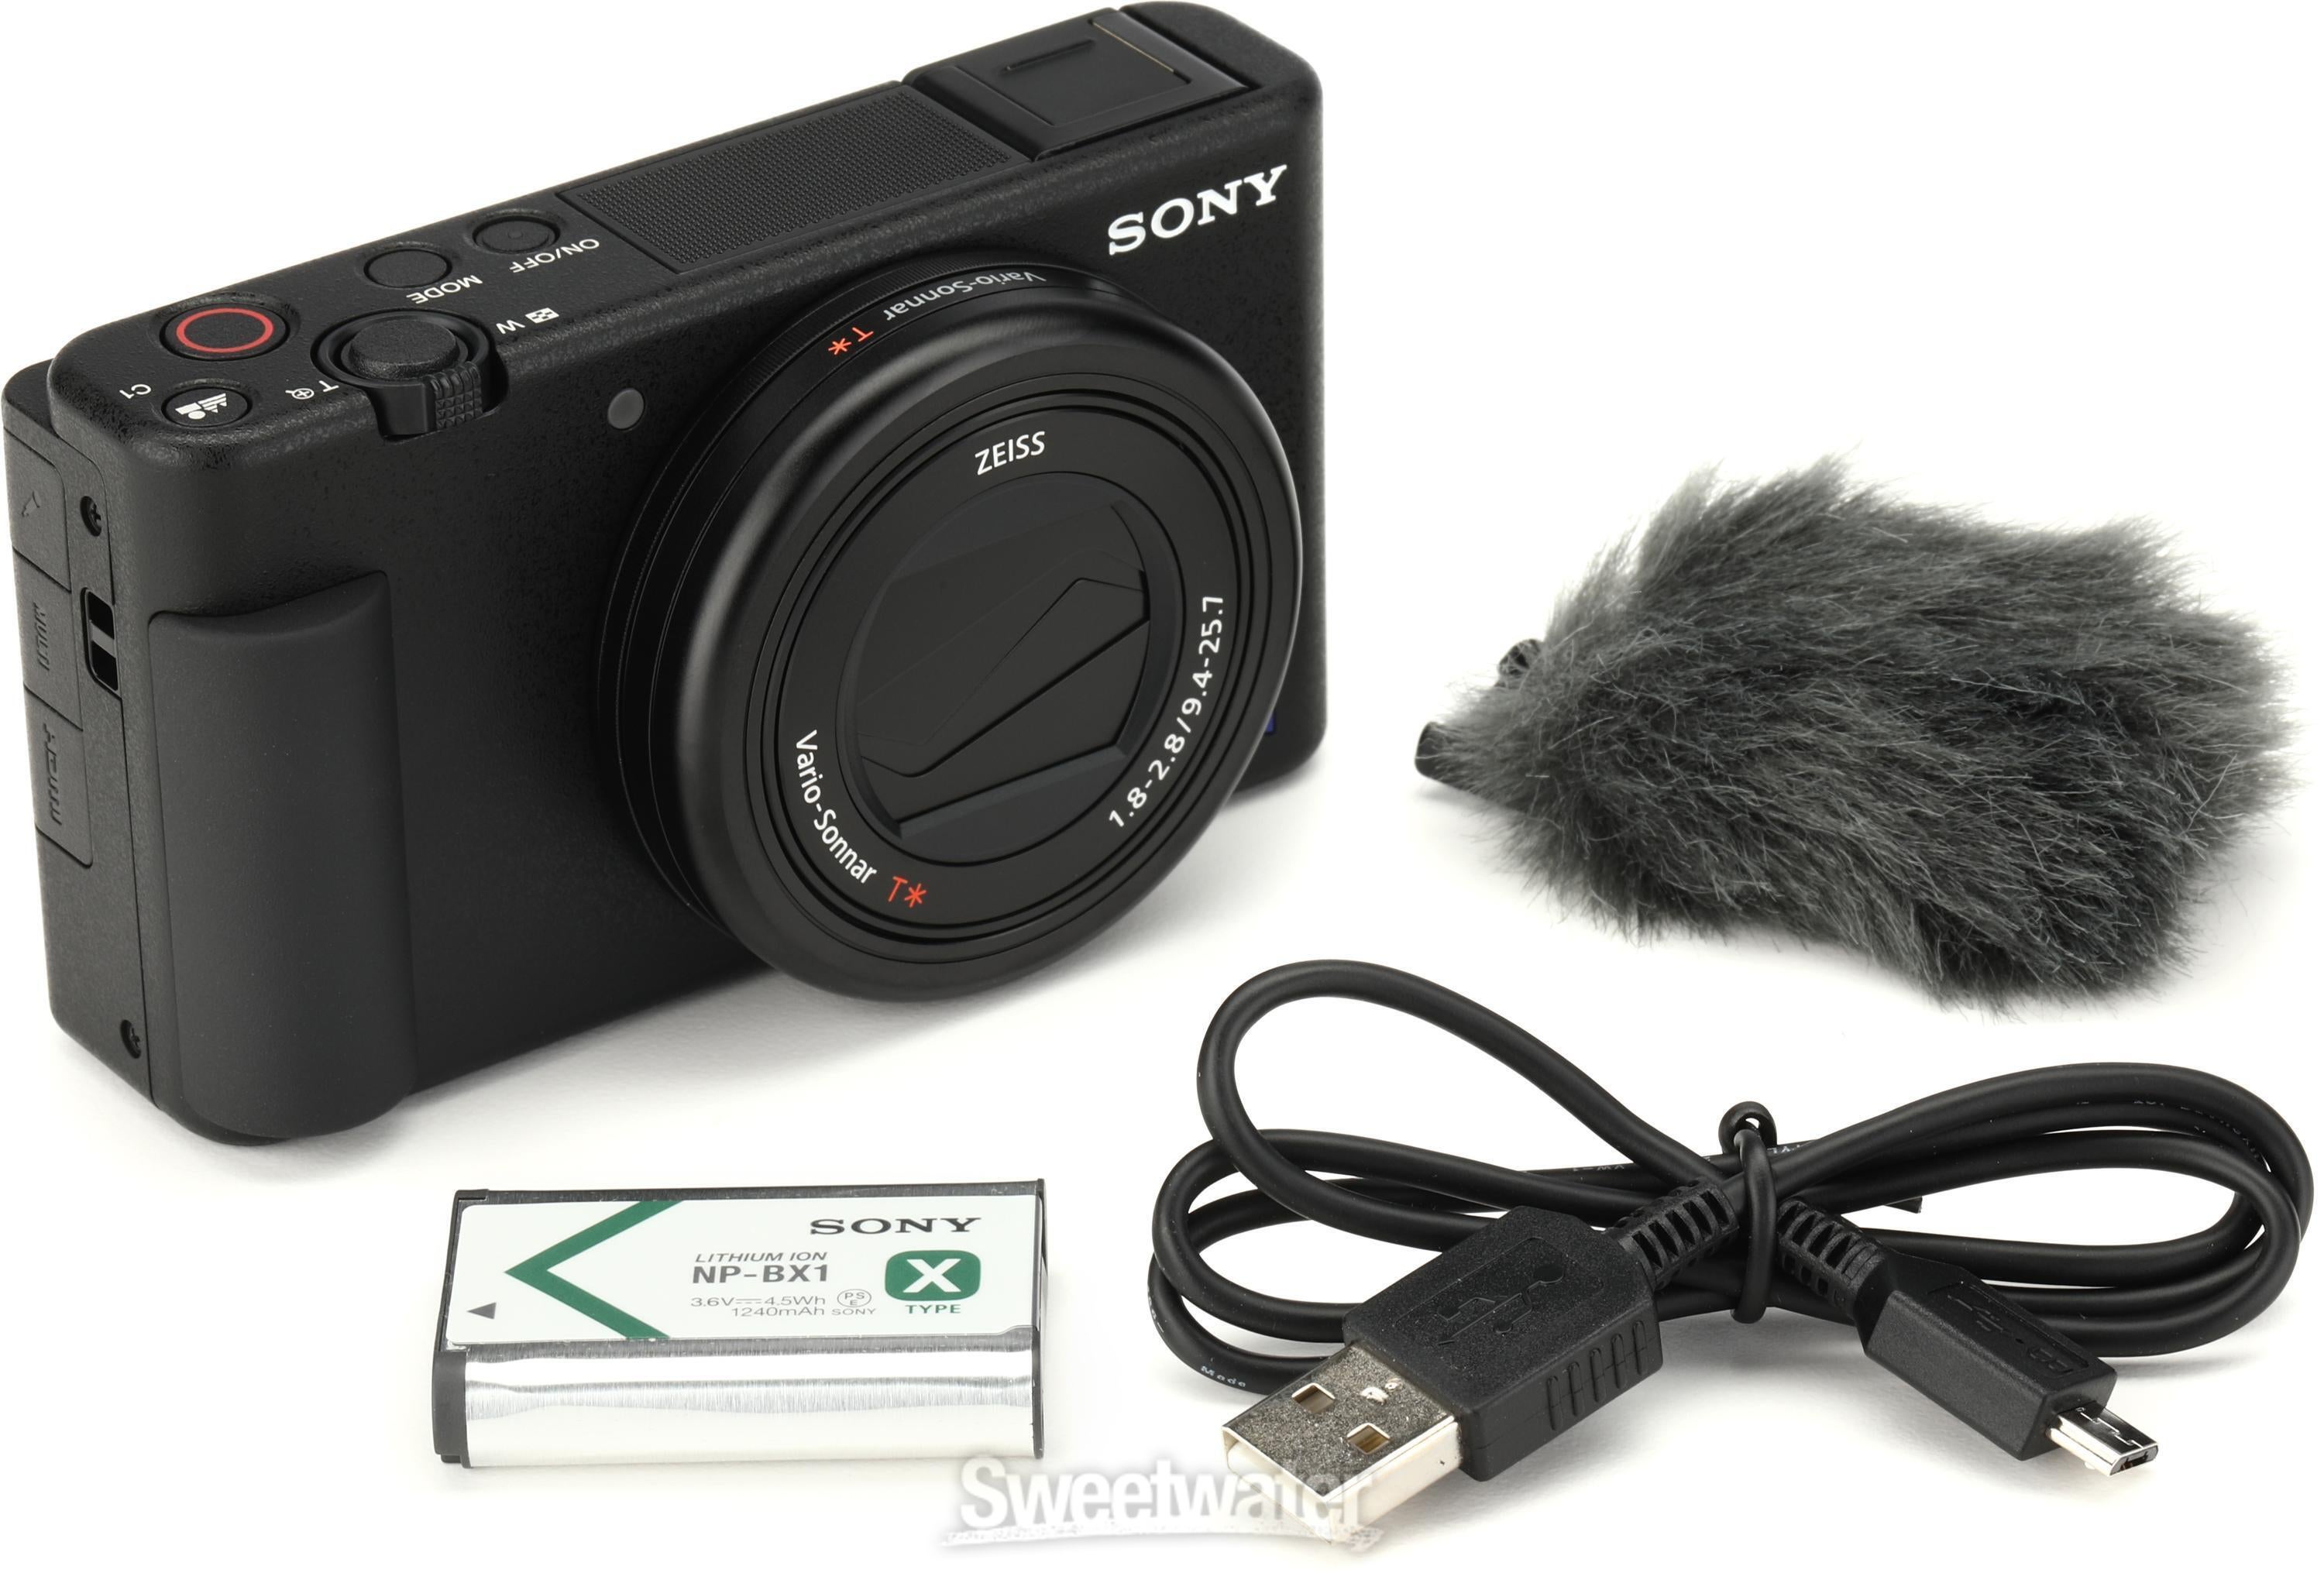 Sony DCZV1/B Content Creator Digital Camera | Sweetwater